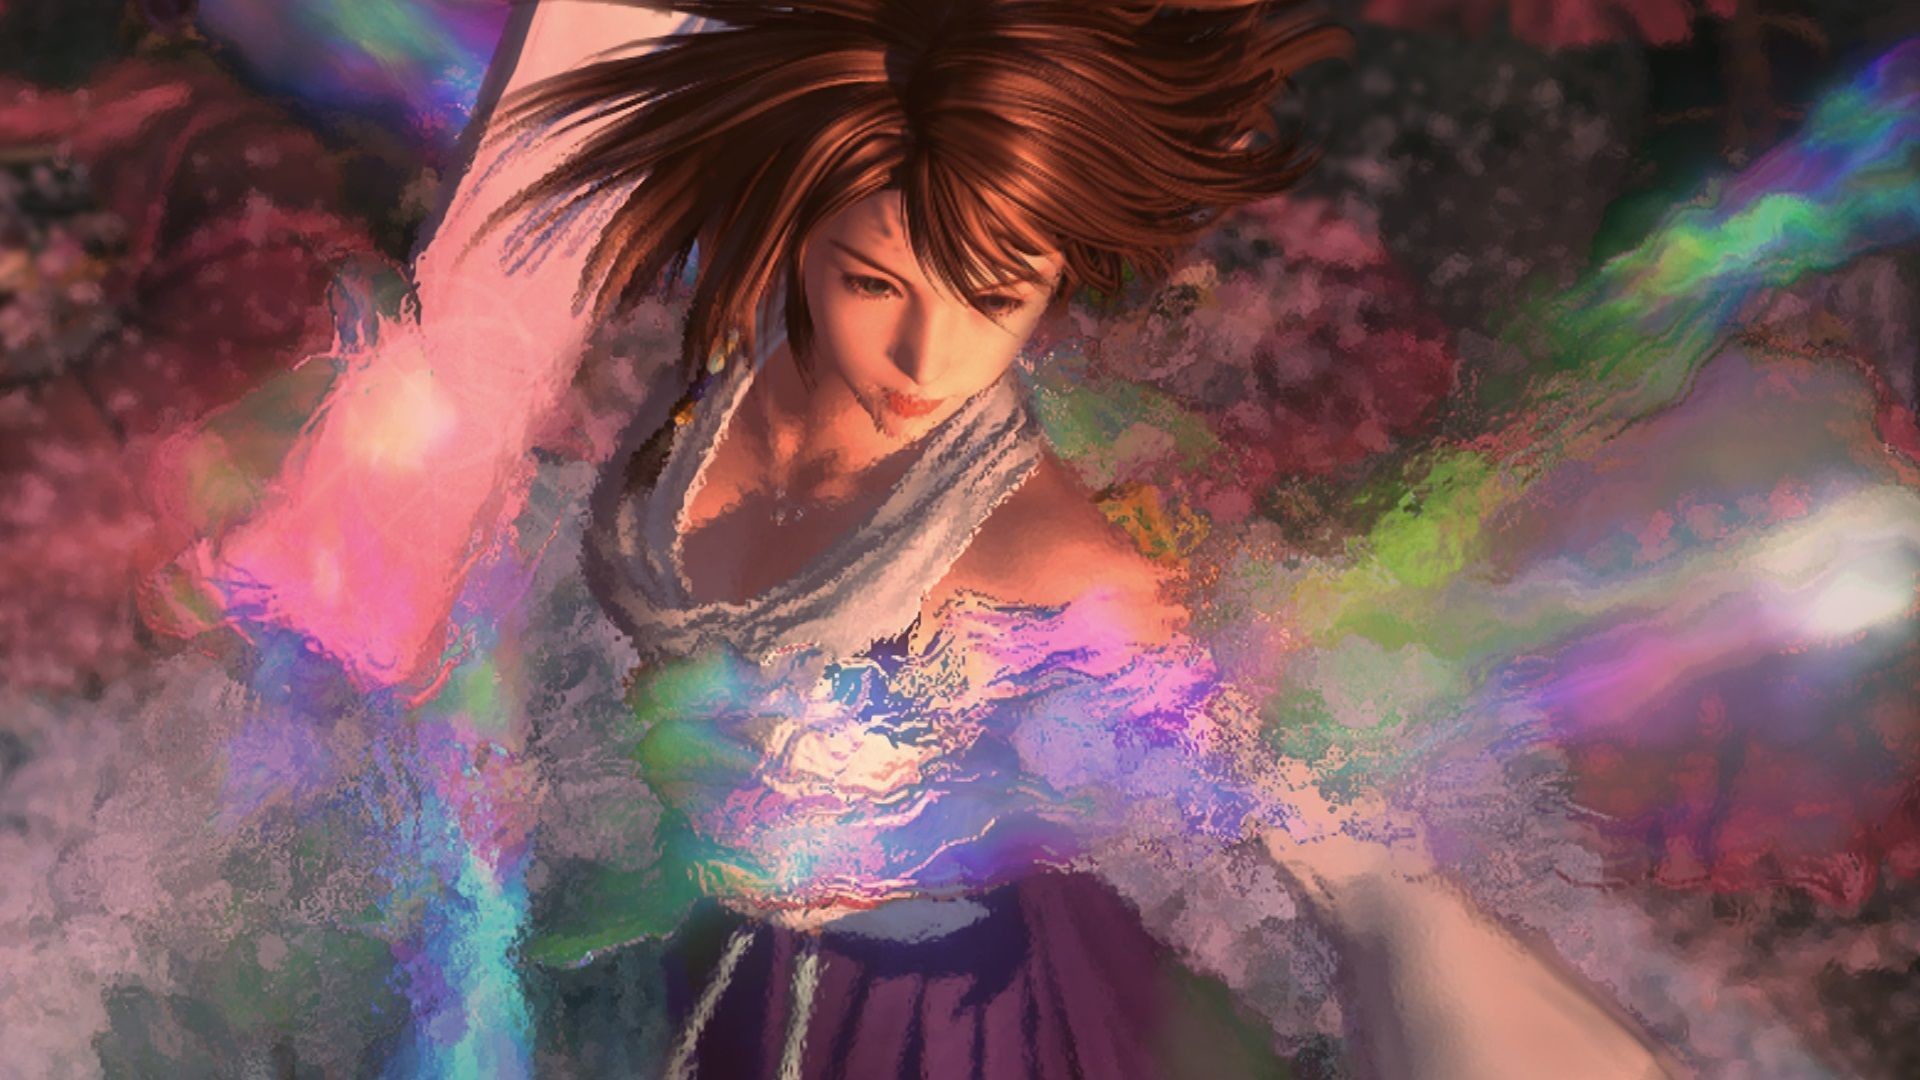 1920x1080 Search Results for “final fantasy x yuna wallpaper” – Adorable Wallpapers